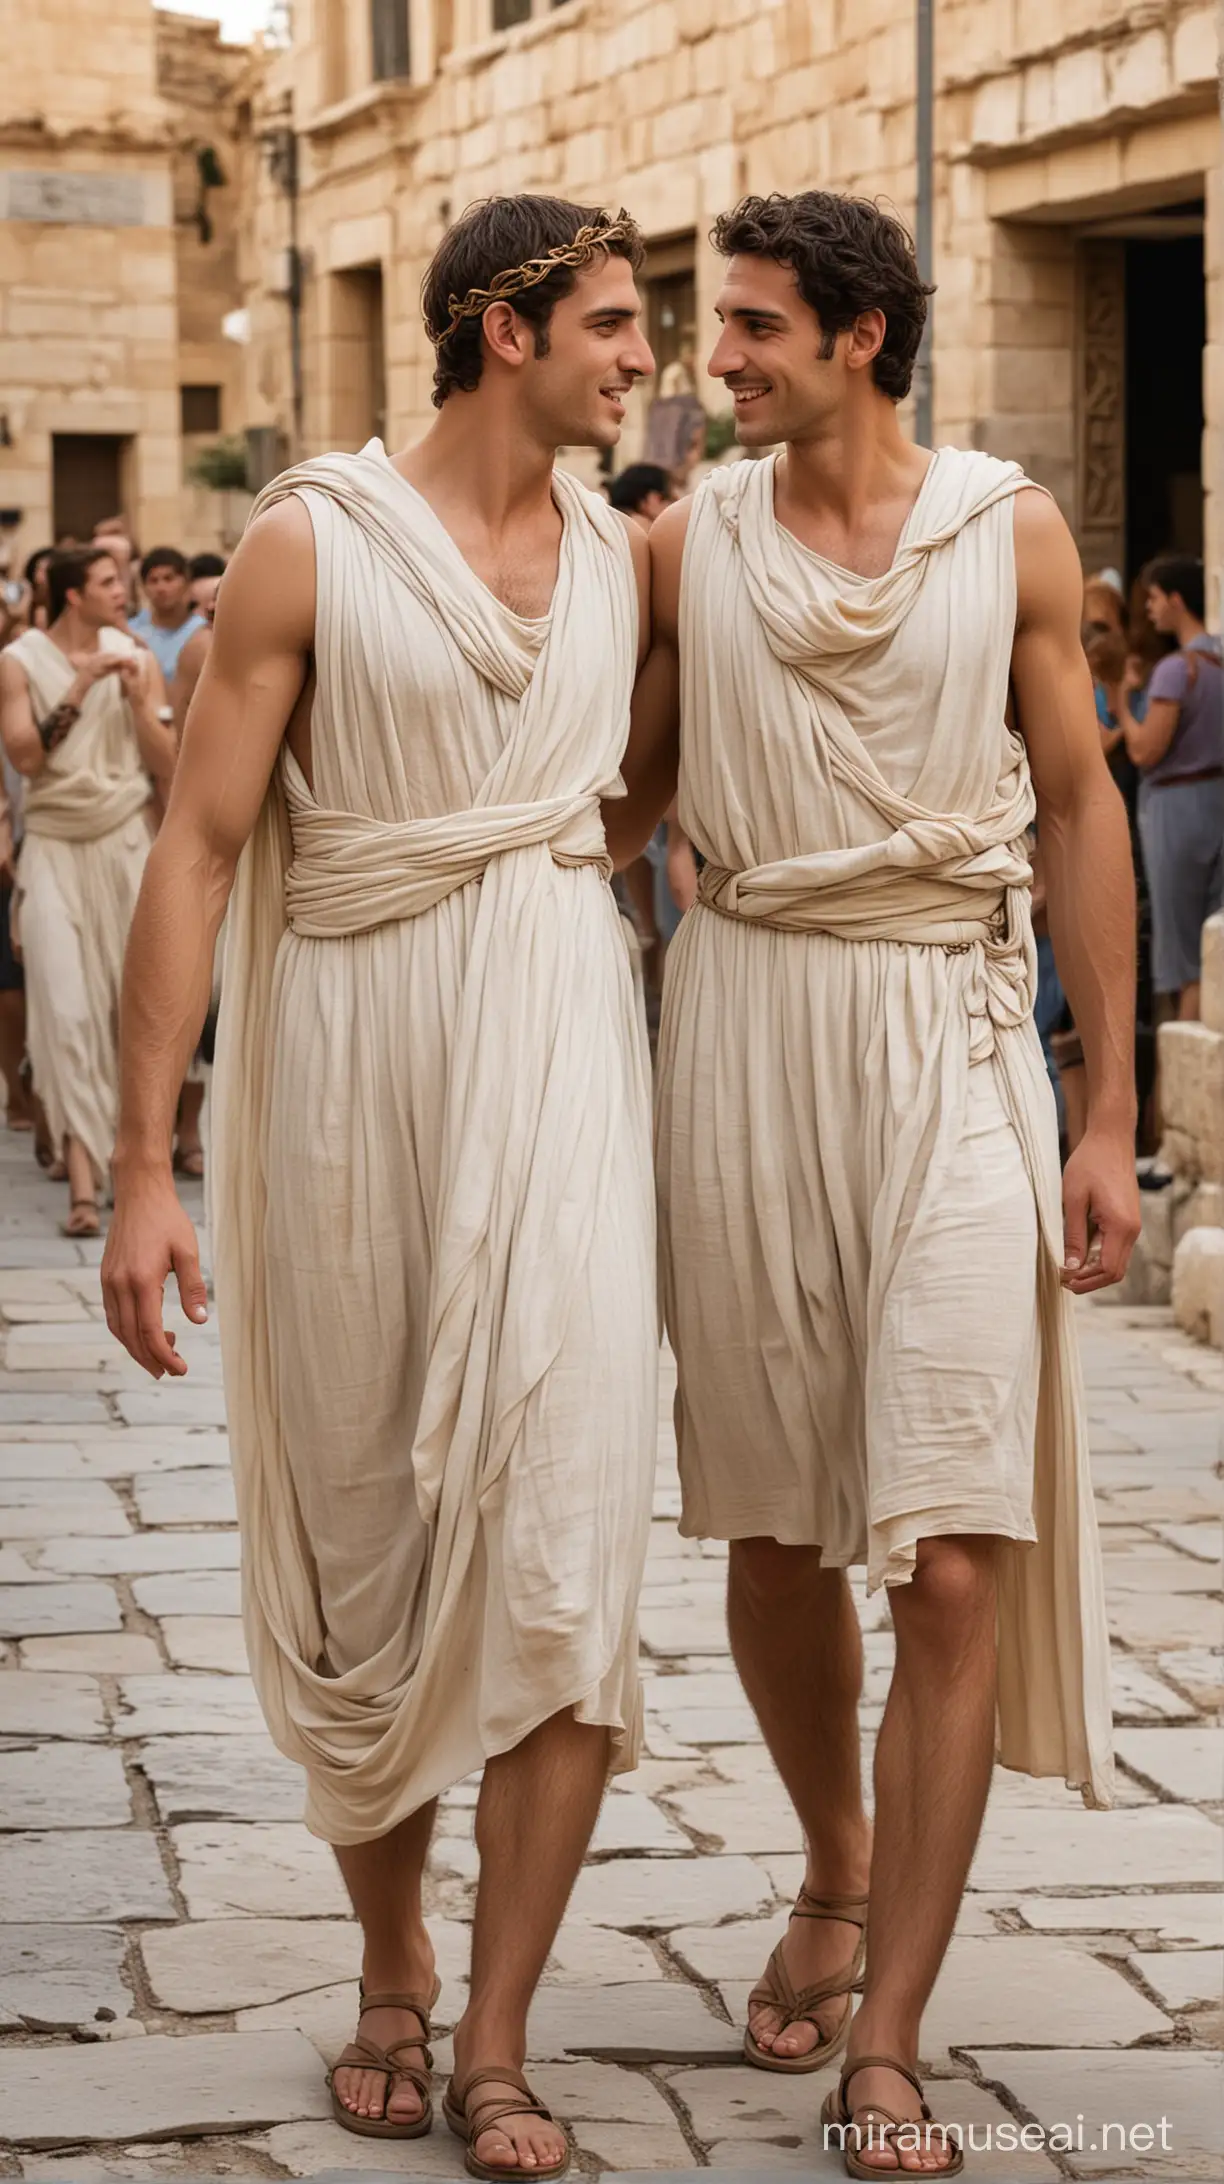 SHOW ME ANCIENT GREECE AND PEOPLE ON STREETS ALL IN LOVE, HOMOSEXUALS BUT ALSO HETERICS
